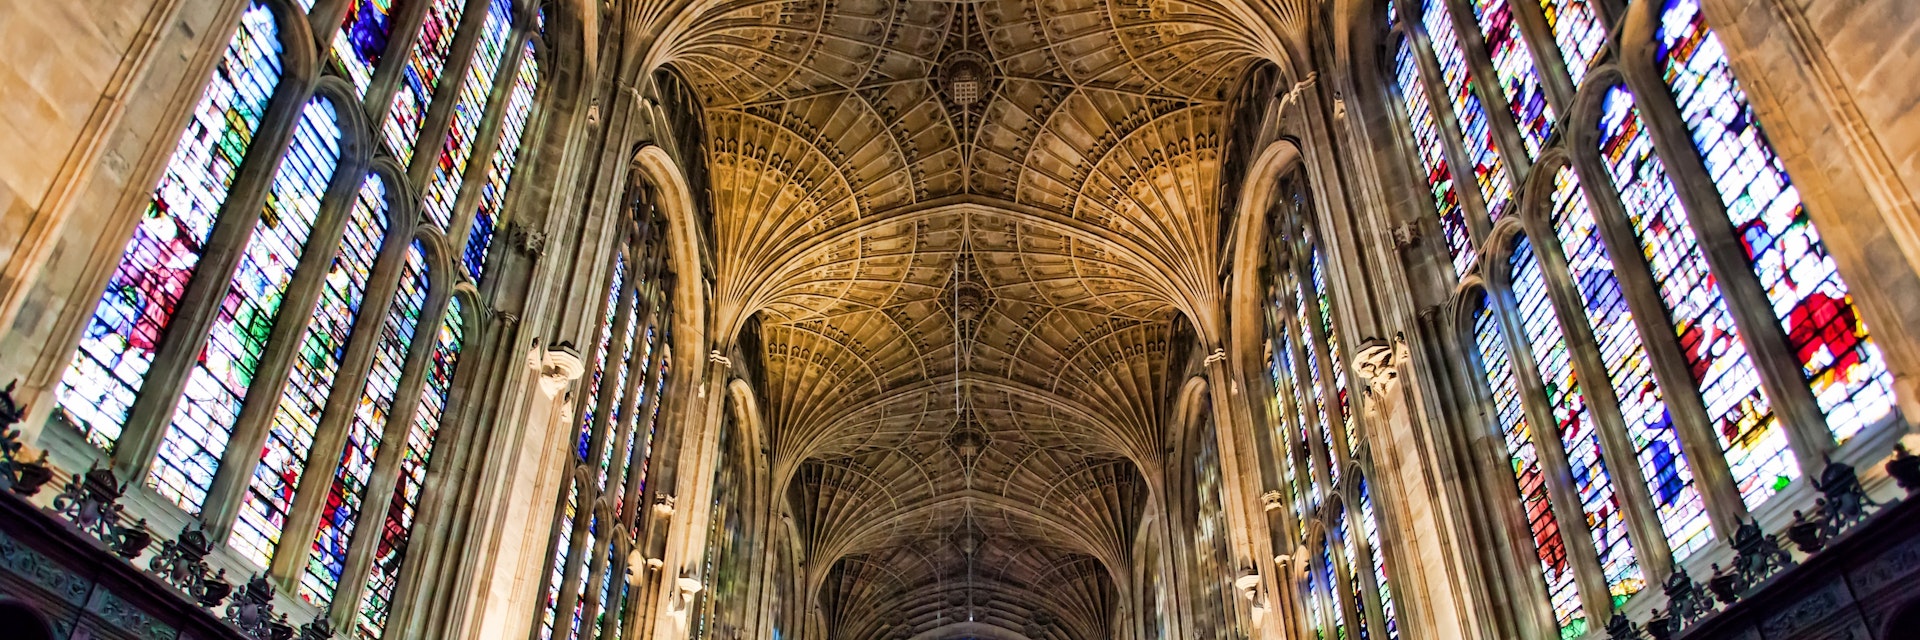 View inside Kings college Chapel Cambridge, showing the fan vault ceiling and vast wooden paneling, and amazing stain glass windows.